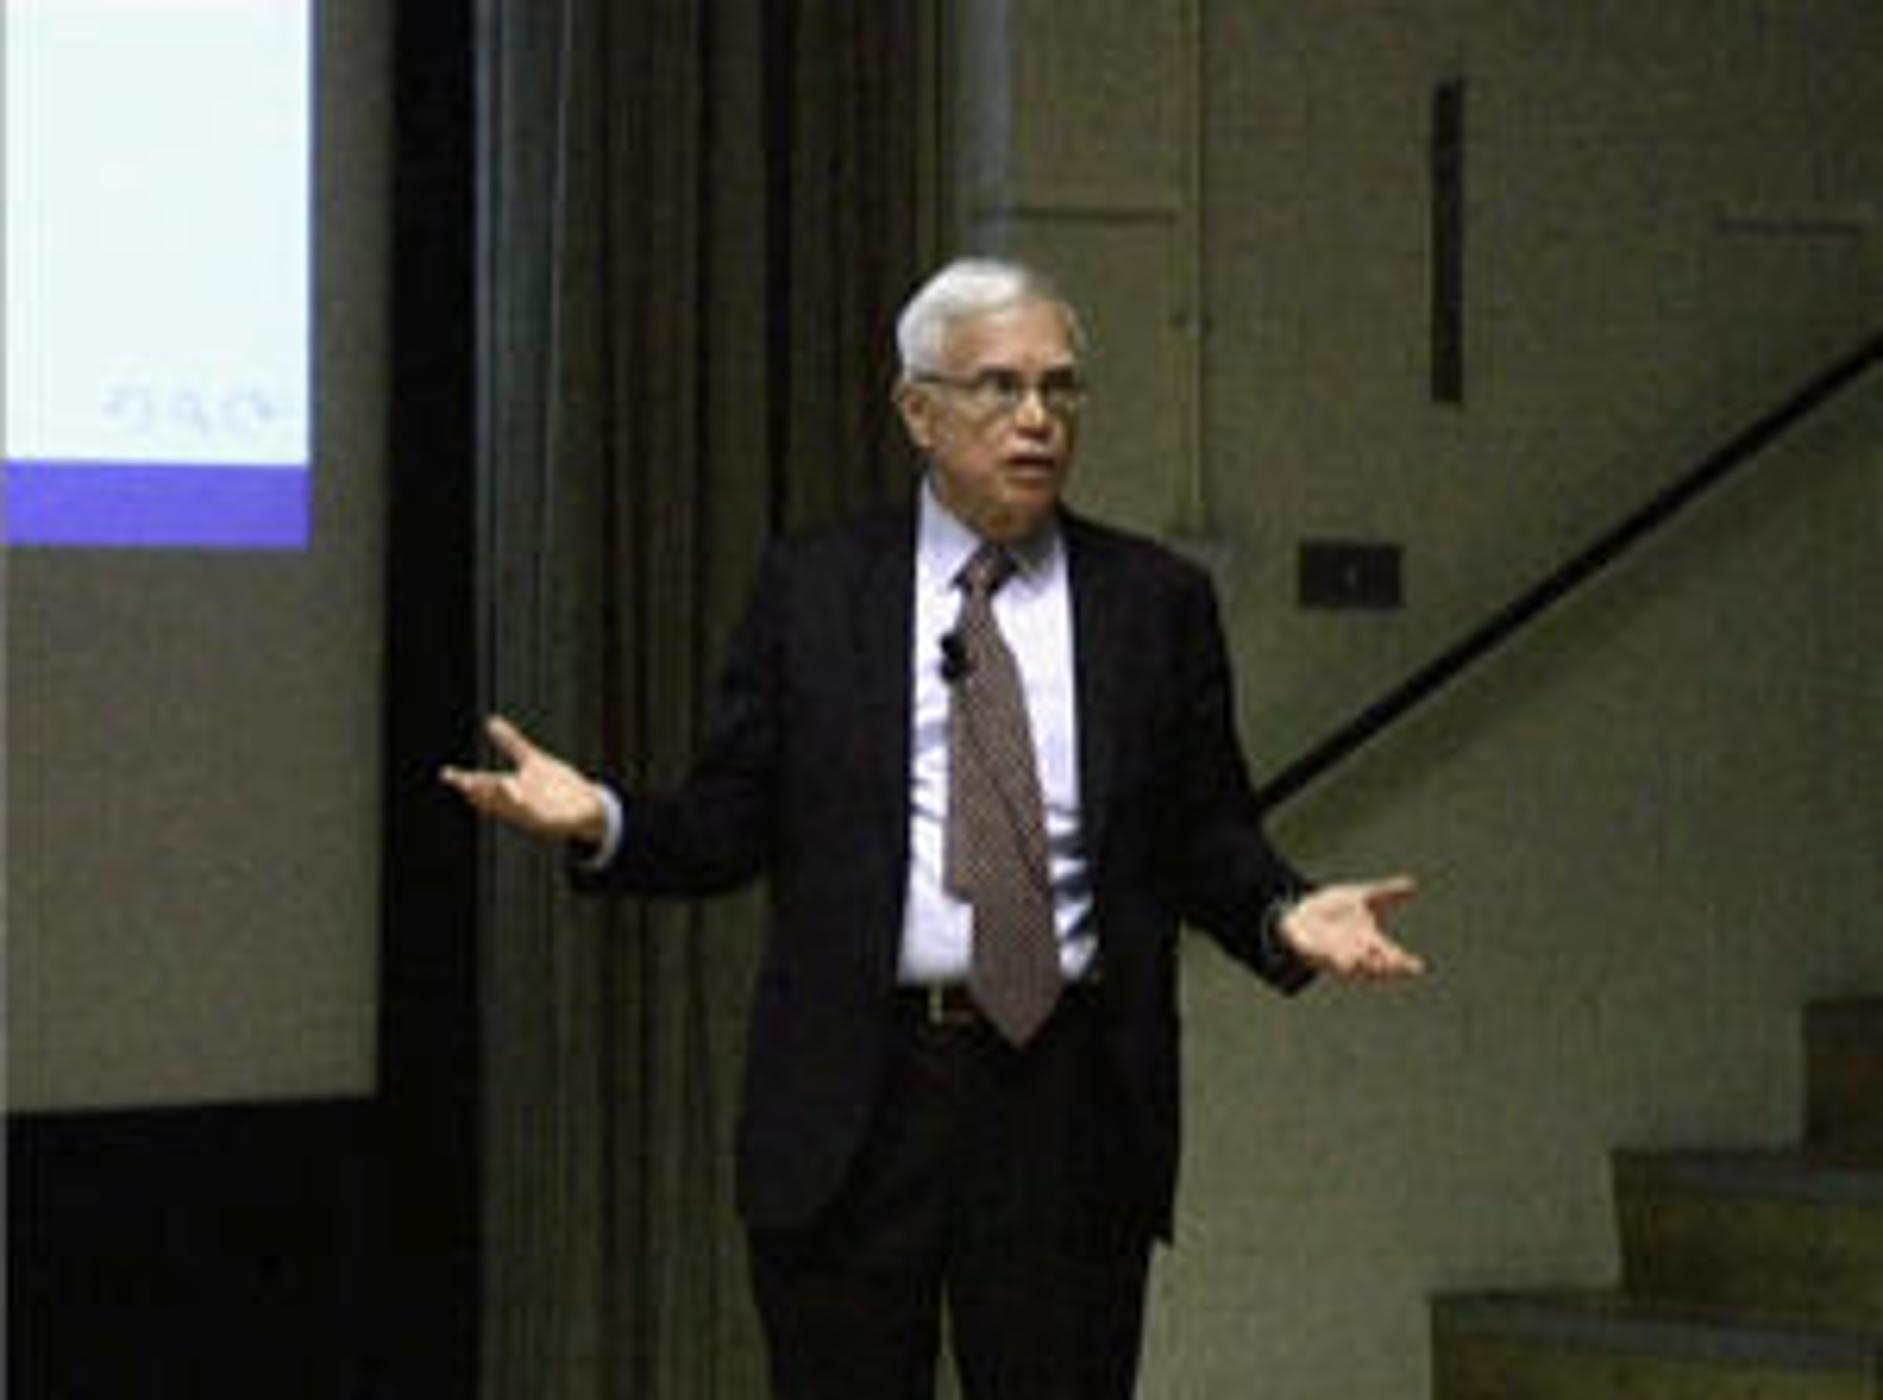 Marshall Lecture 2010-2011 - Professor James Heckman - The economics and psychology of human development and inequality - Question and Answer Session